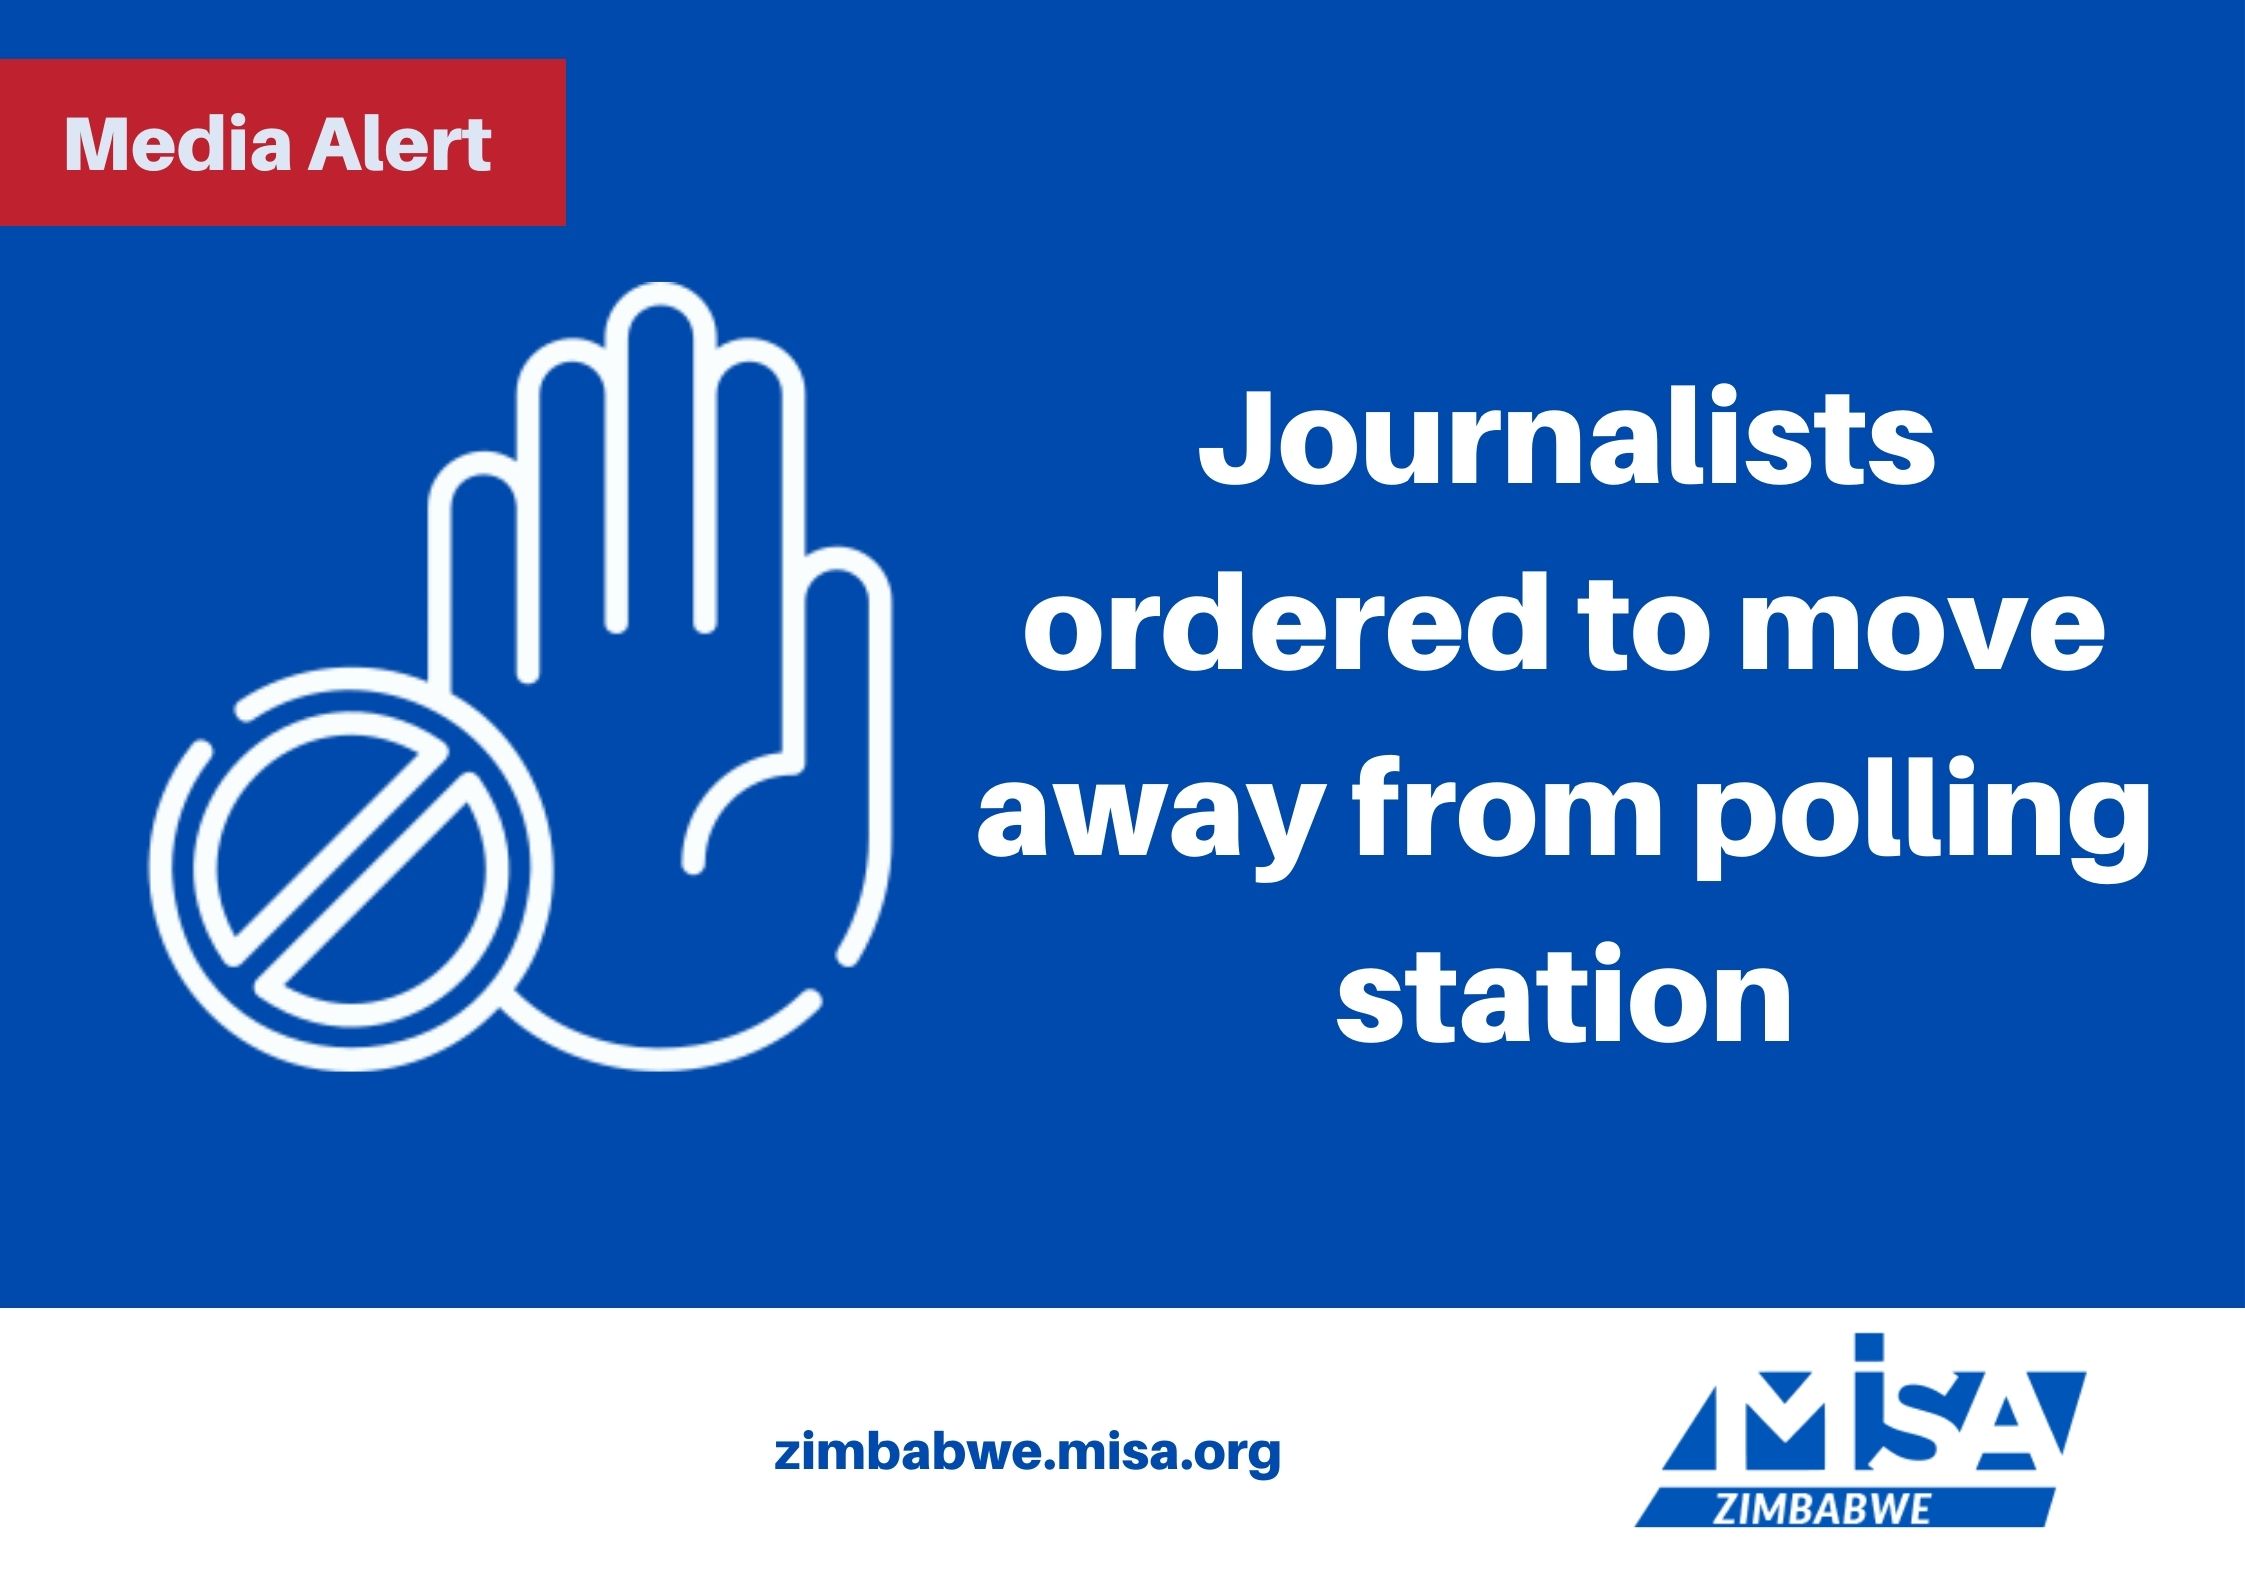 Journalists ordered to move away from polling station